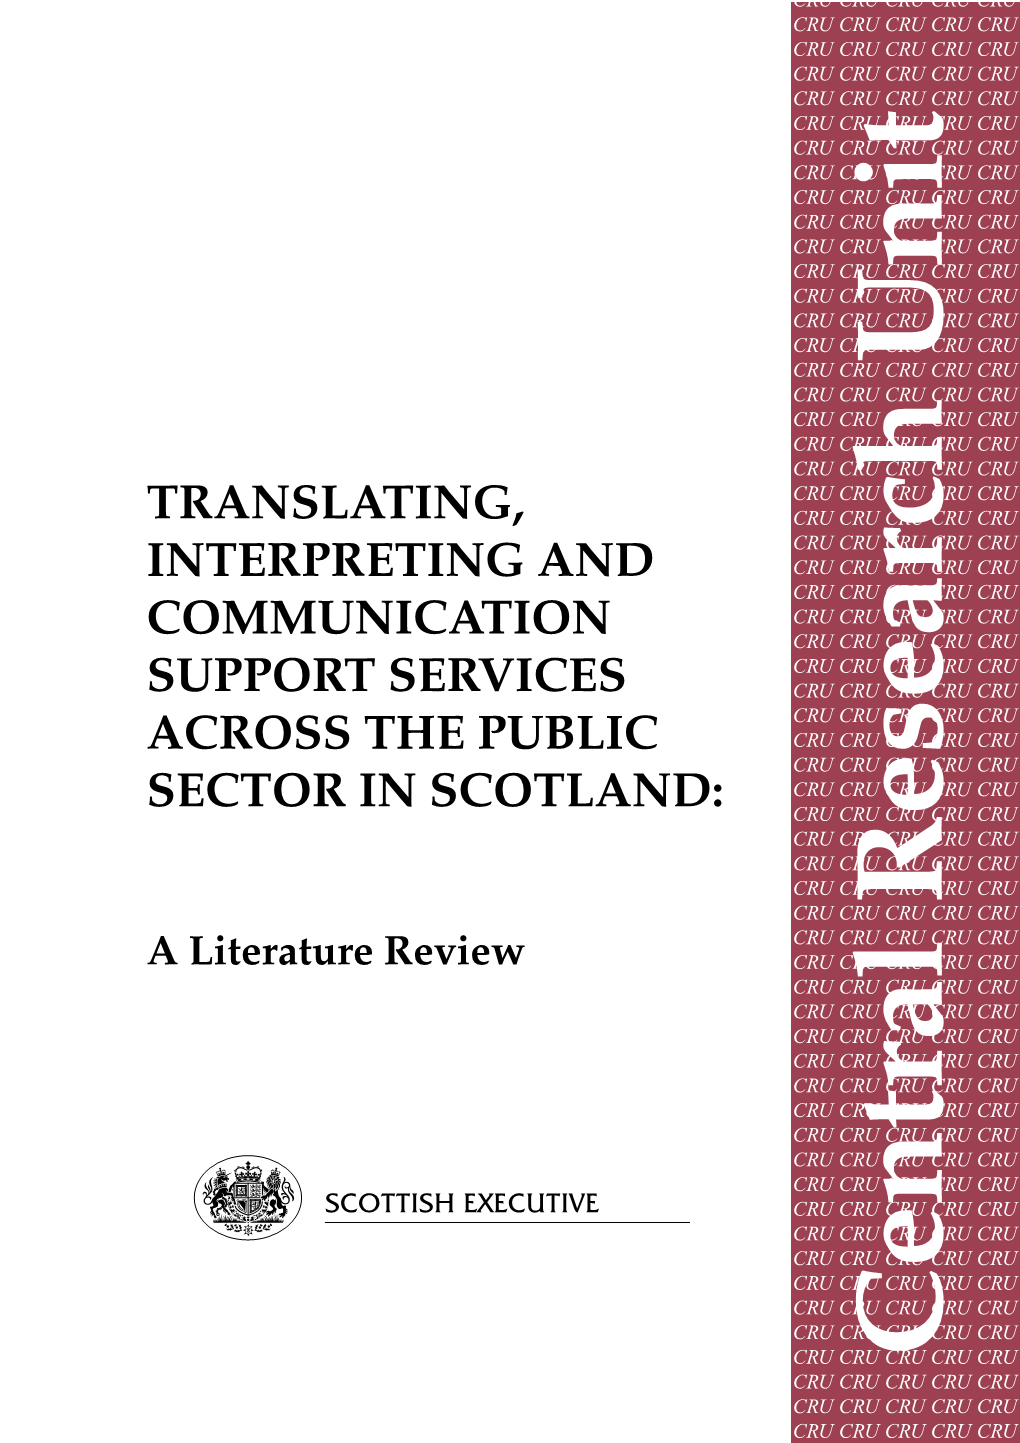 Translating, Interpreting and Communication Support Services Across the Public Sector in Scotland